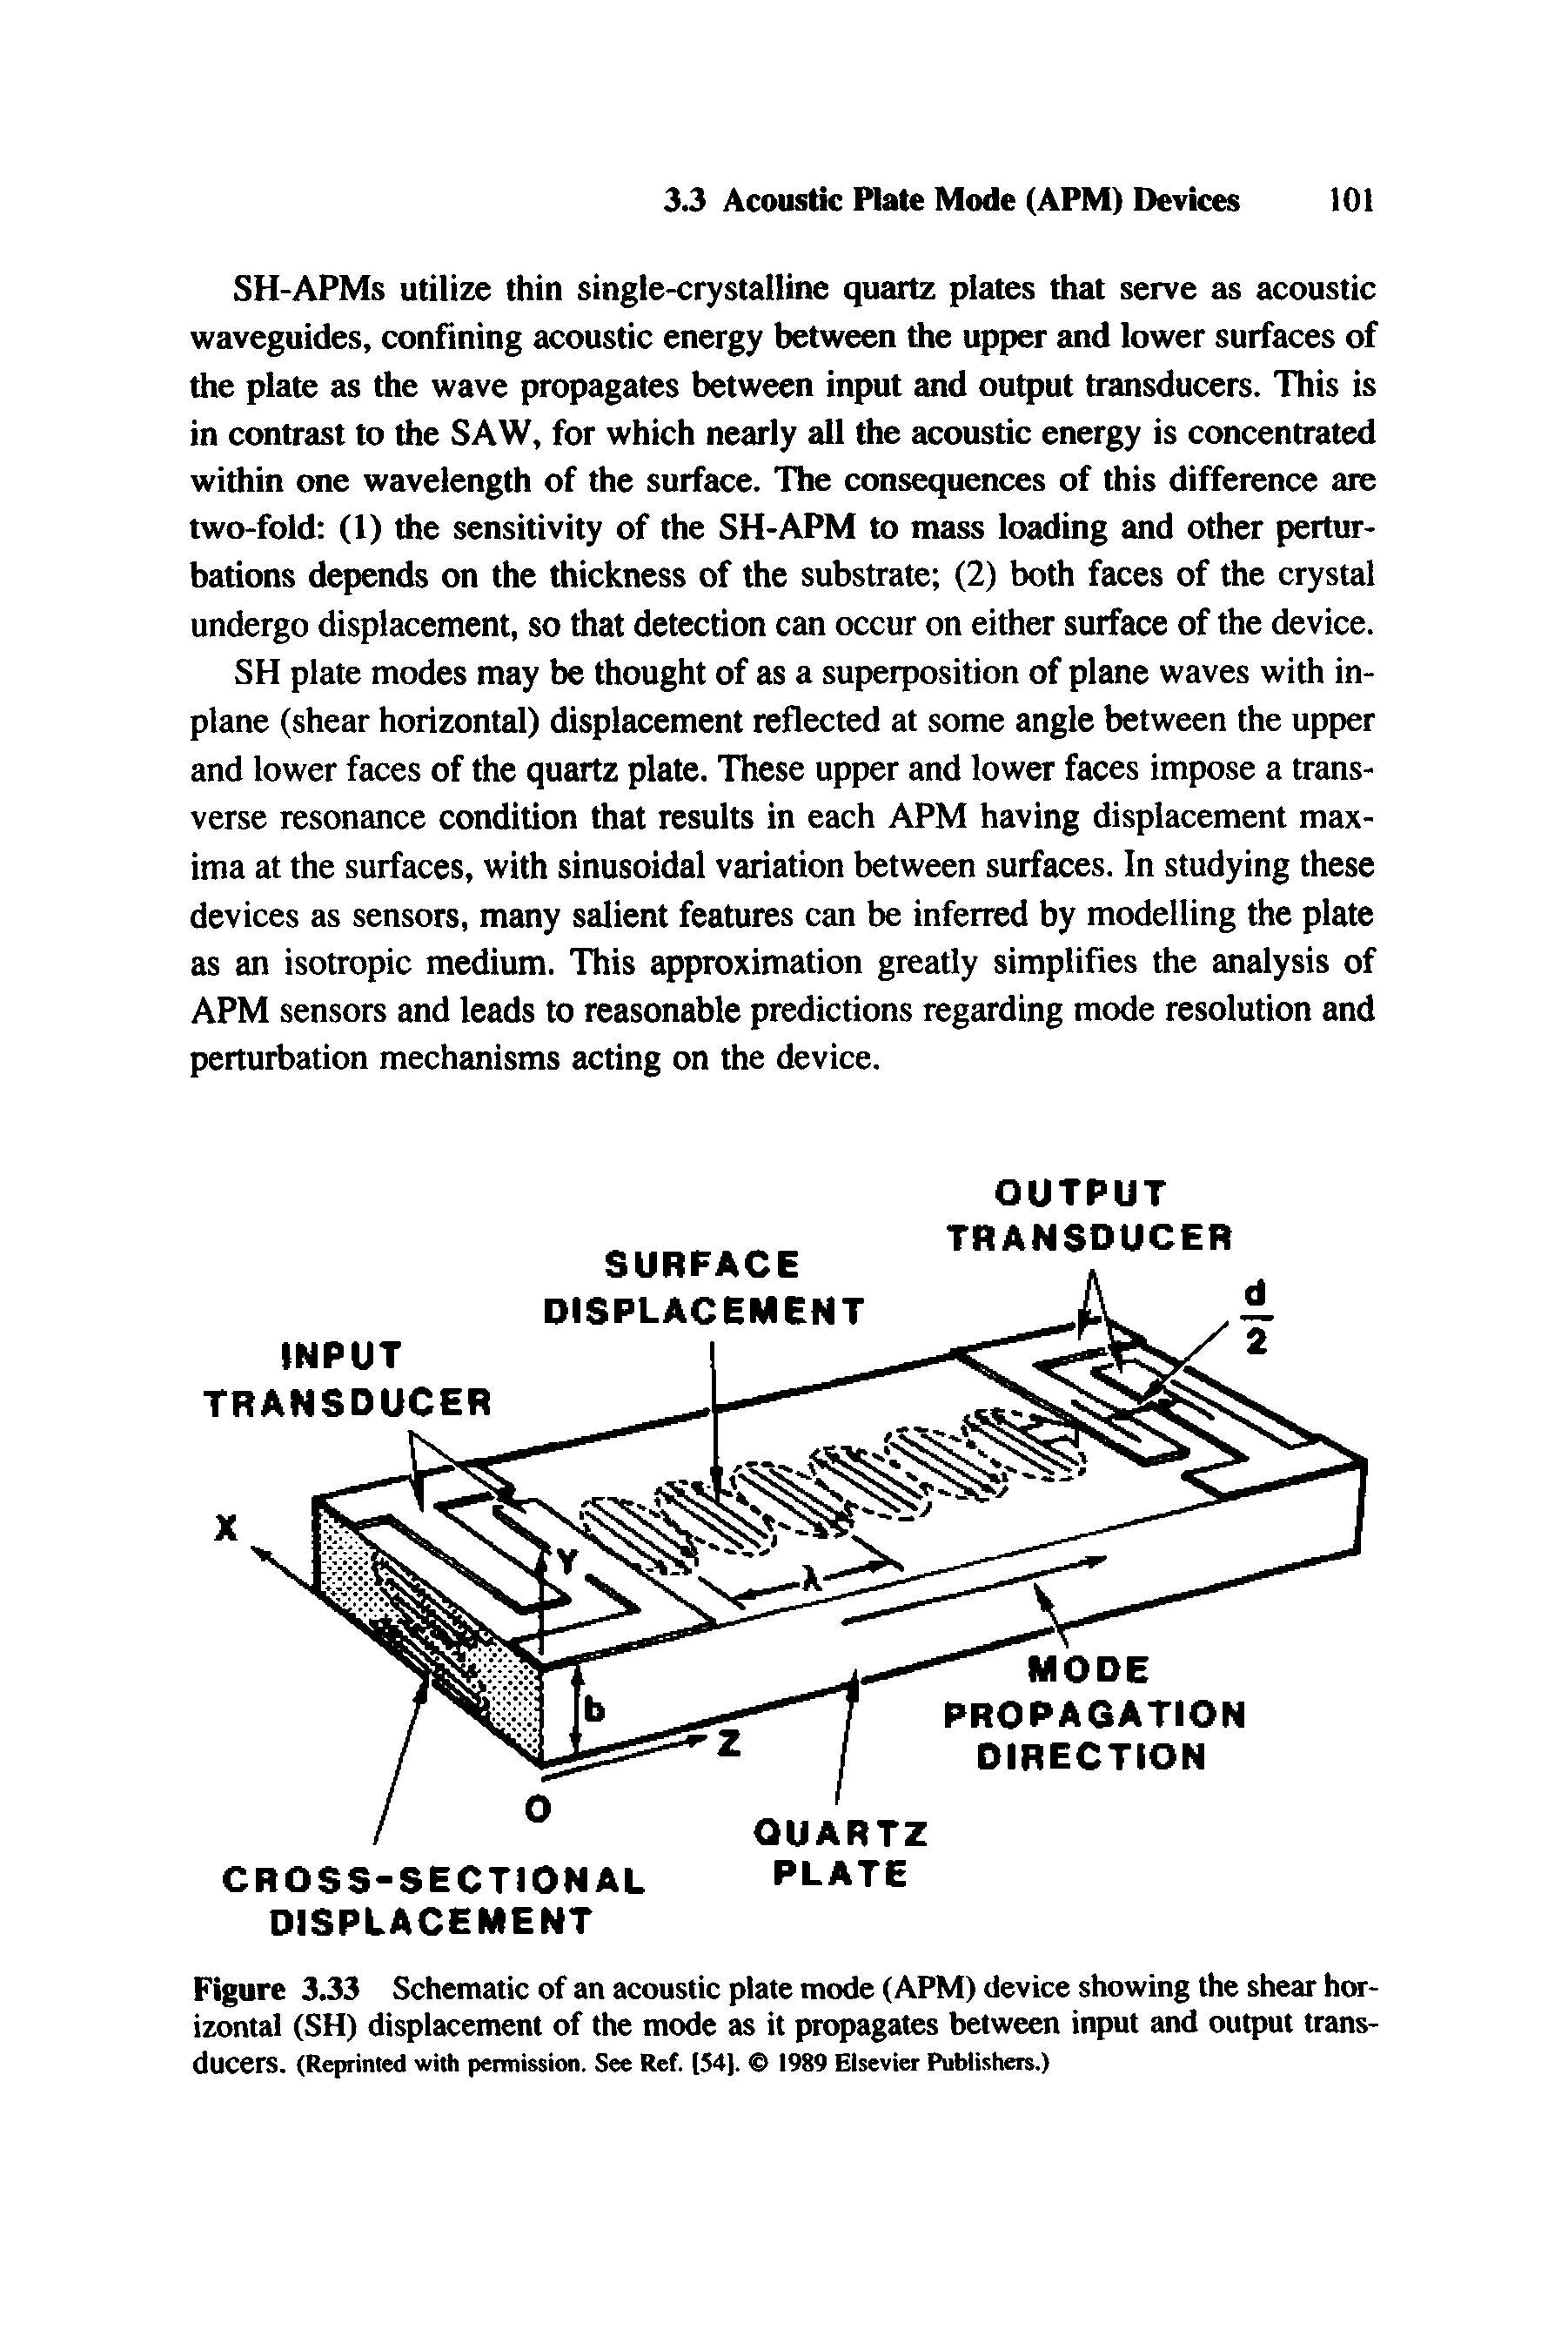 Figure 3.33 Schematic of an acoustic plate mode (APM) device showing the shear horizontal (SH) displacement of the mode as it propagates between input and output transducers. (Reprinted with permission. See Ref. (54). 1989 Elsevier Publishers.)...